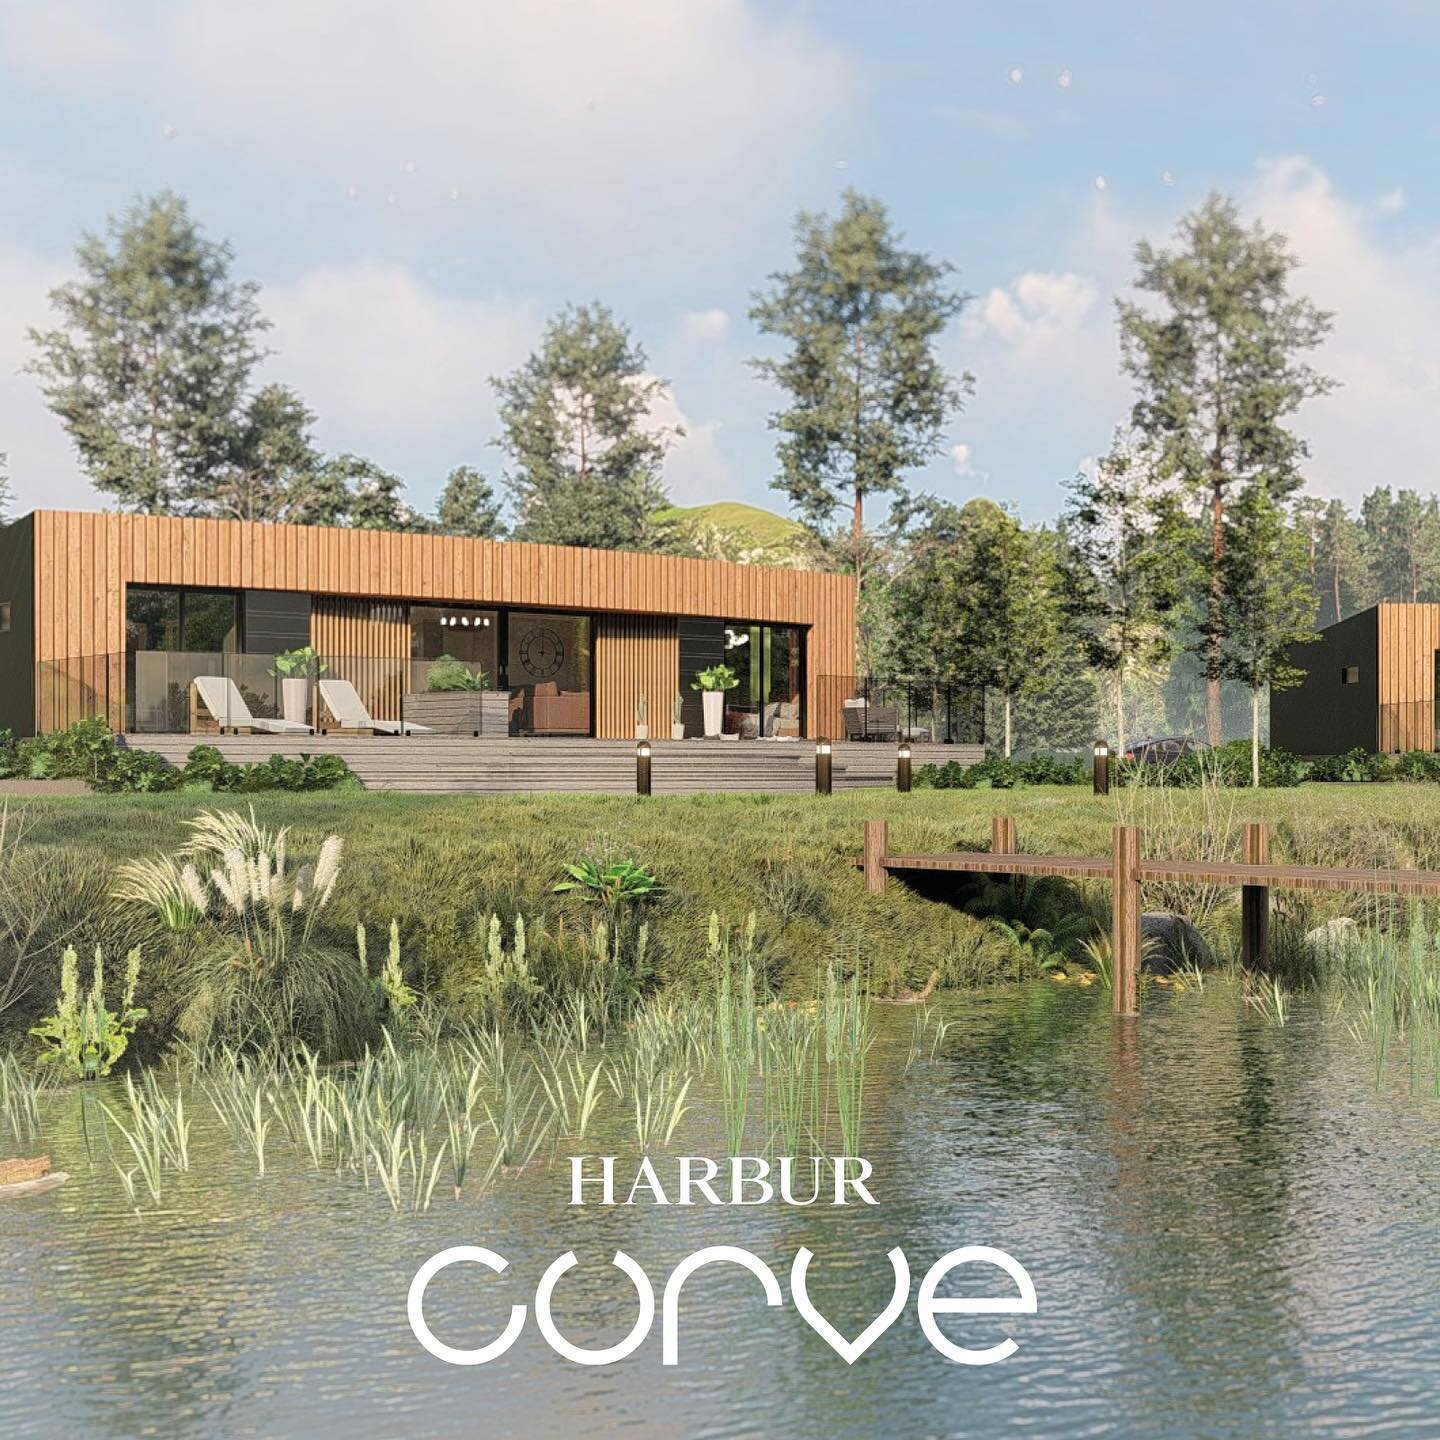 Are you looking for a holiday lodge that perfectly complements any landscape, especially one with a beautiful lakeside setting? Look no further than the&nbsp;Harbur&nbsp;Curve holiday lodge!��Our holiday lodges are carefully crafted to blend seamless